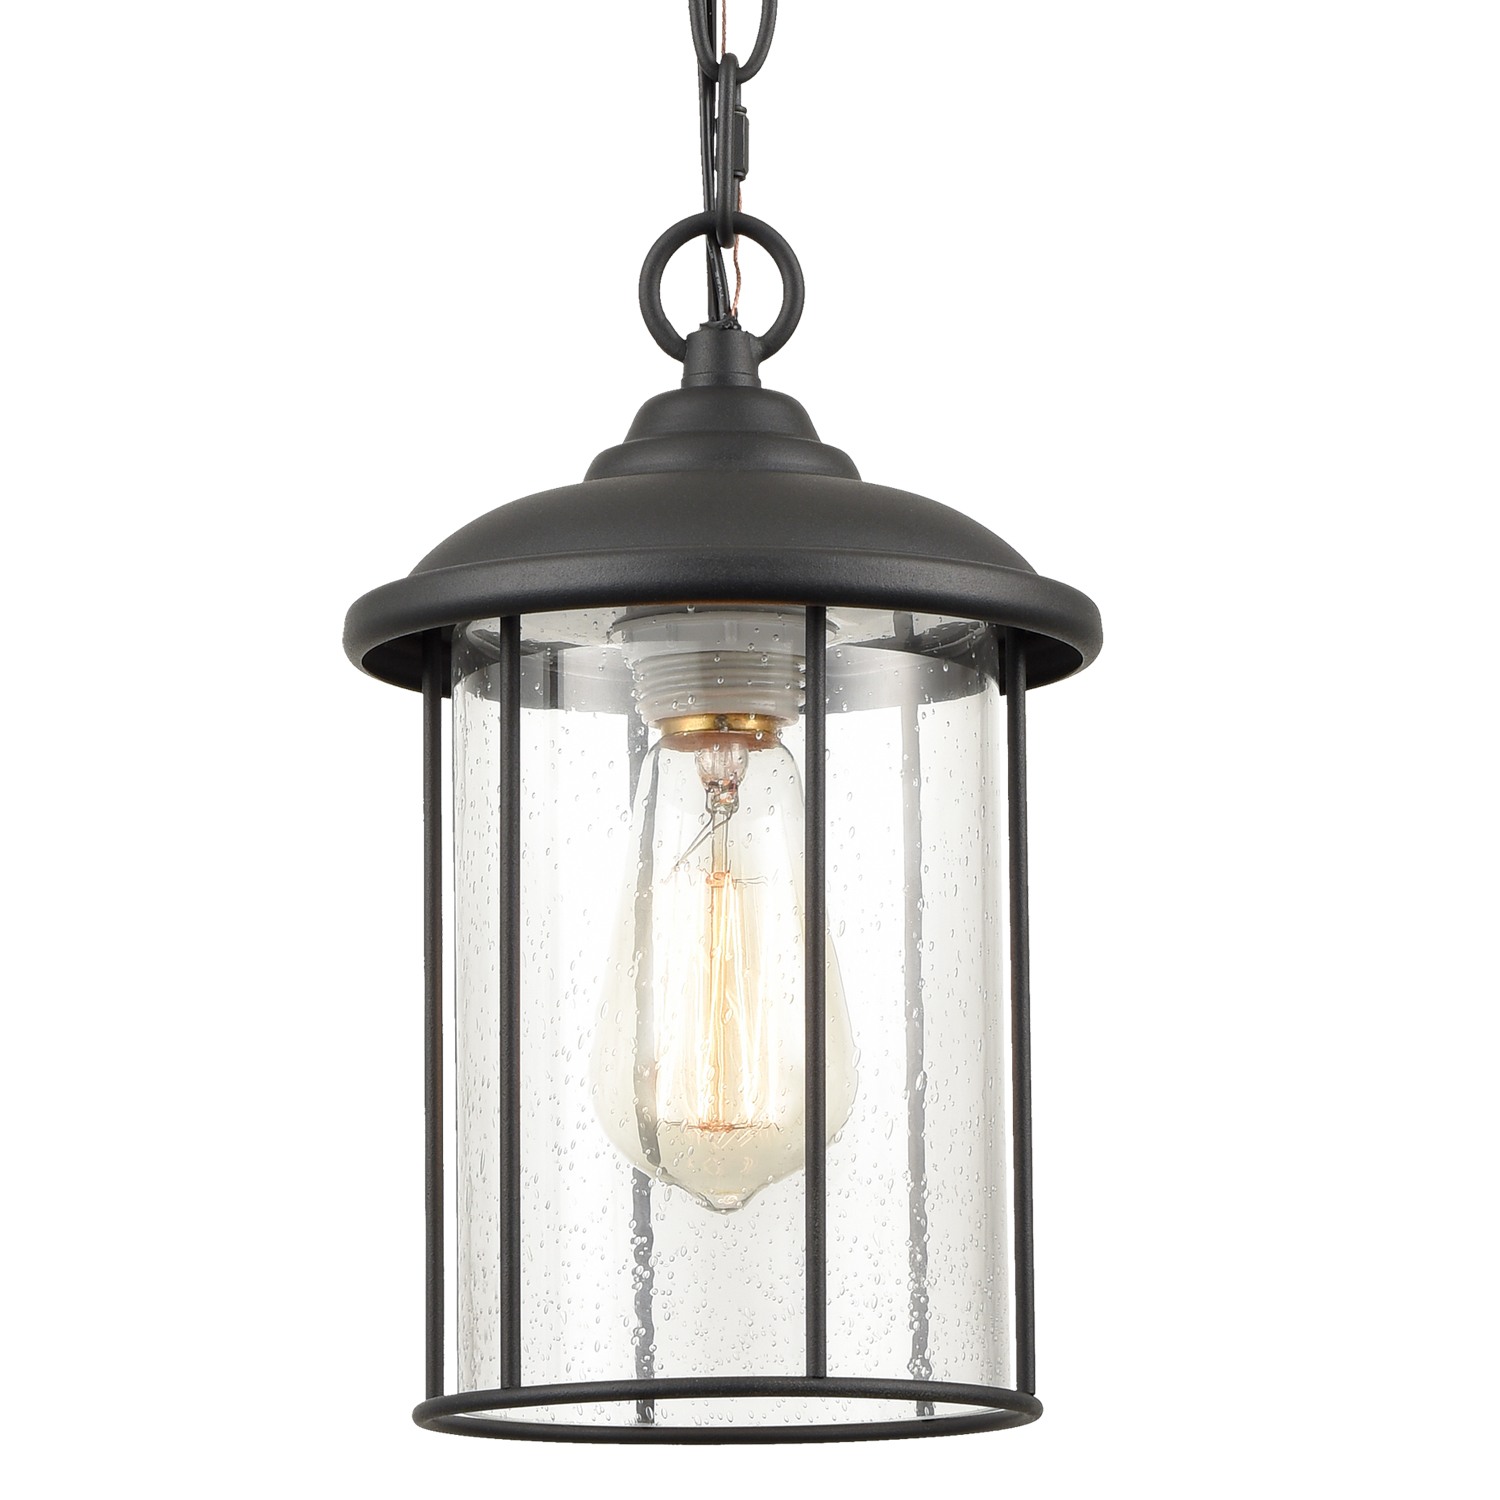 Outdoor Pendant Light Fixtures Glass Ceiling Hanging with Chain